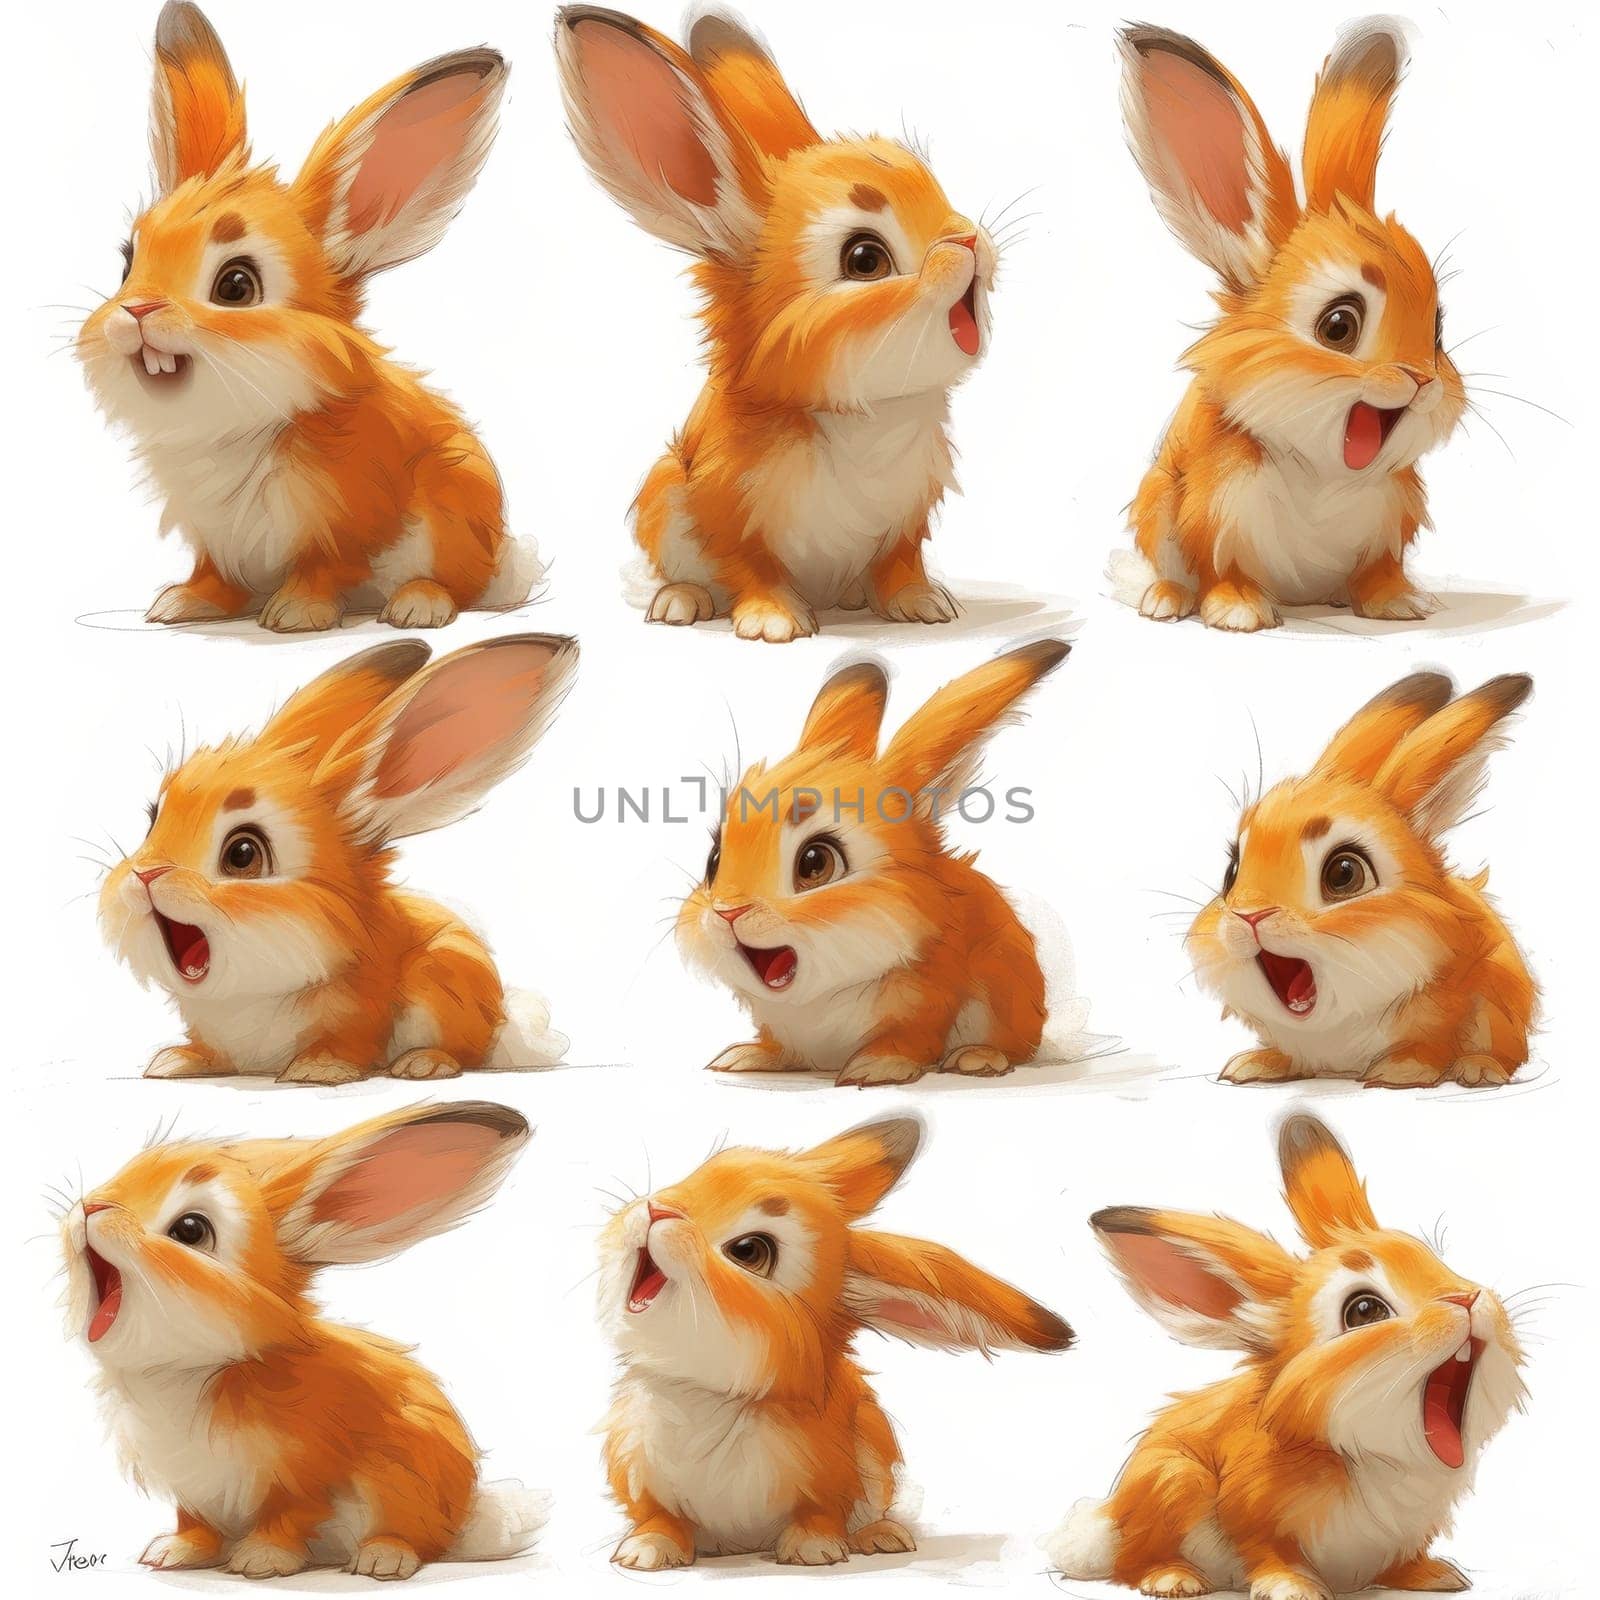 A set of adorable cute red rabbits on a white background by Lobachad